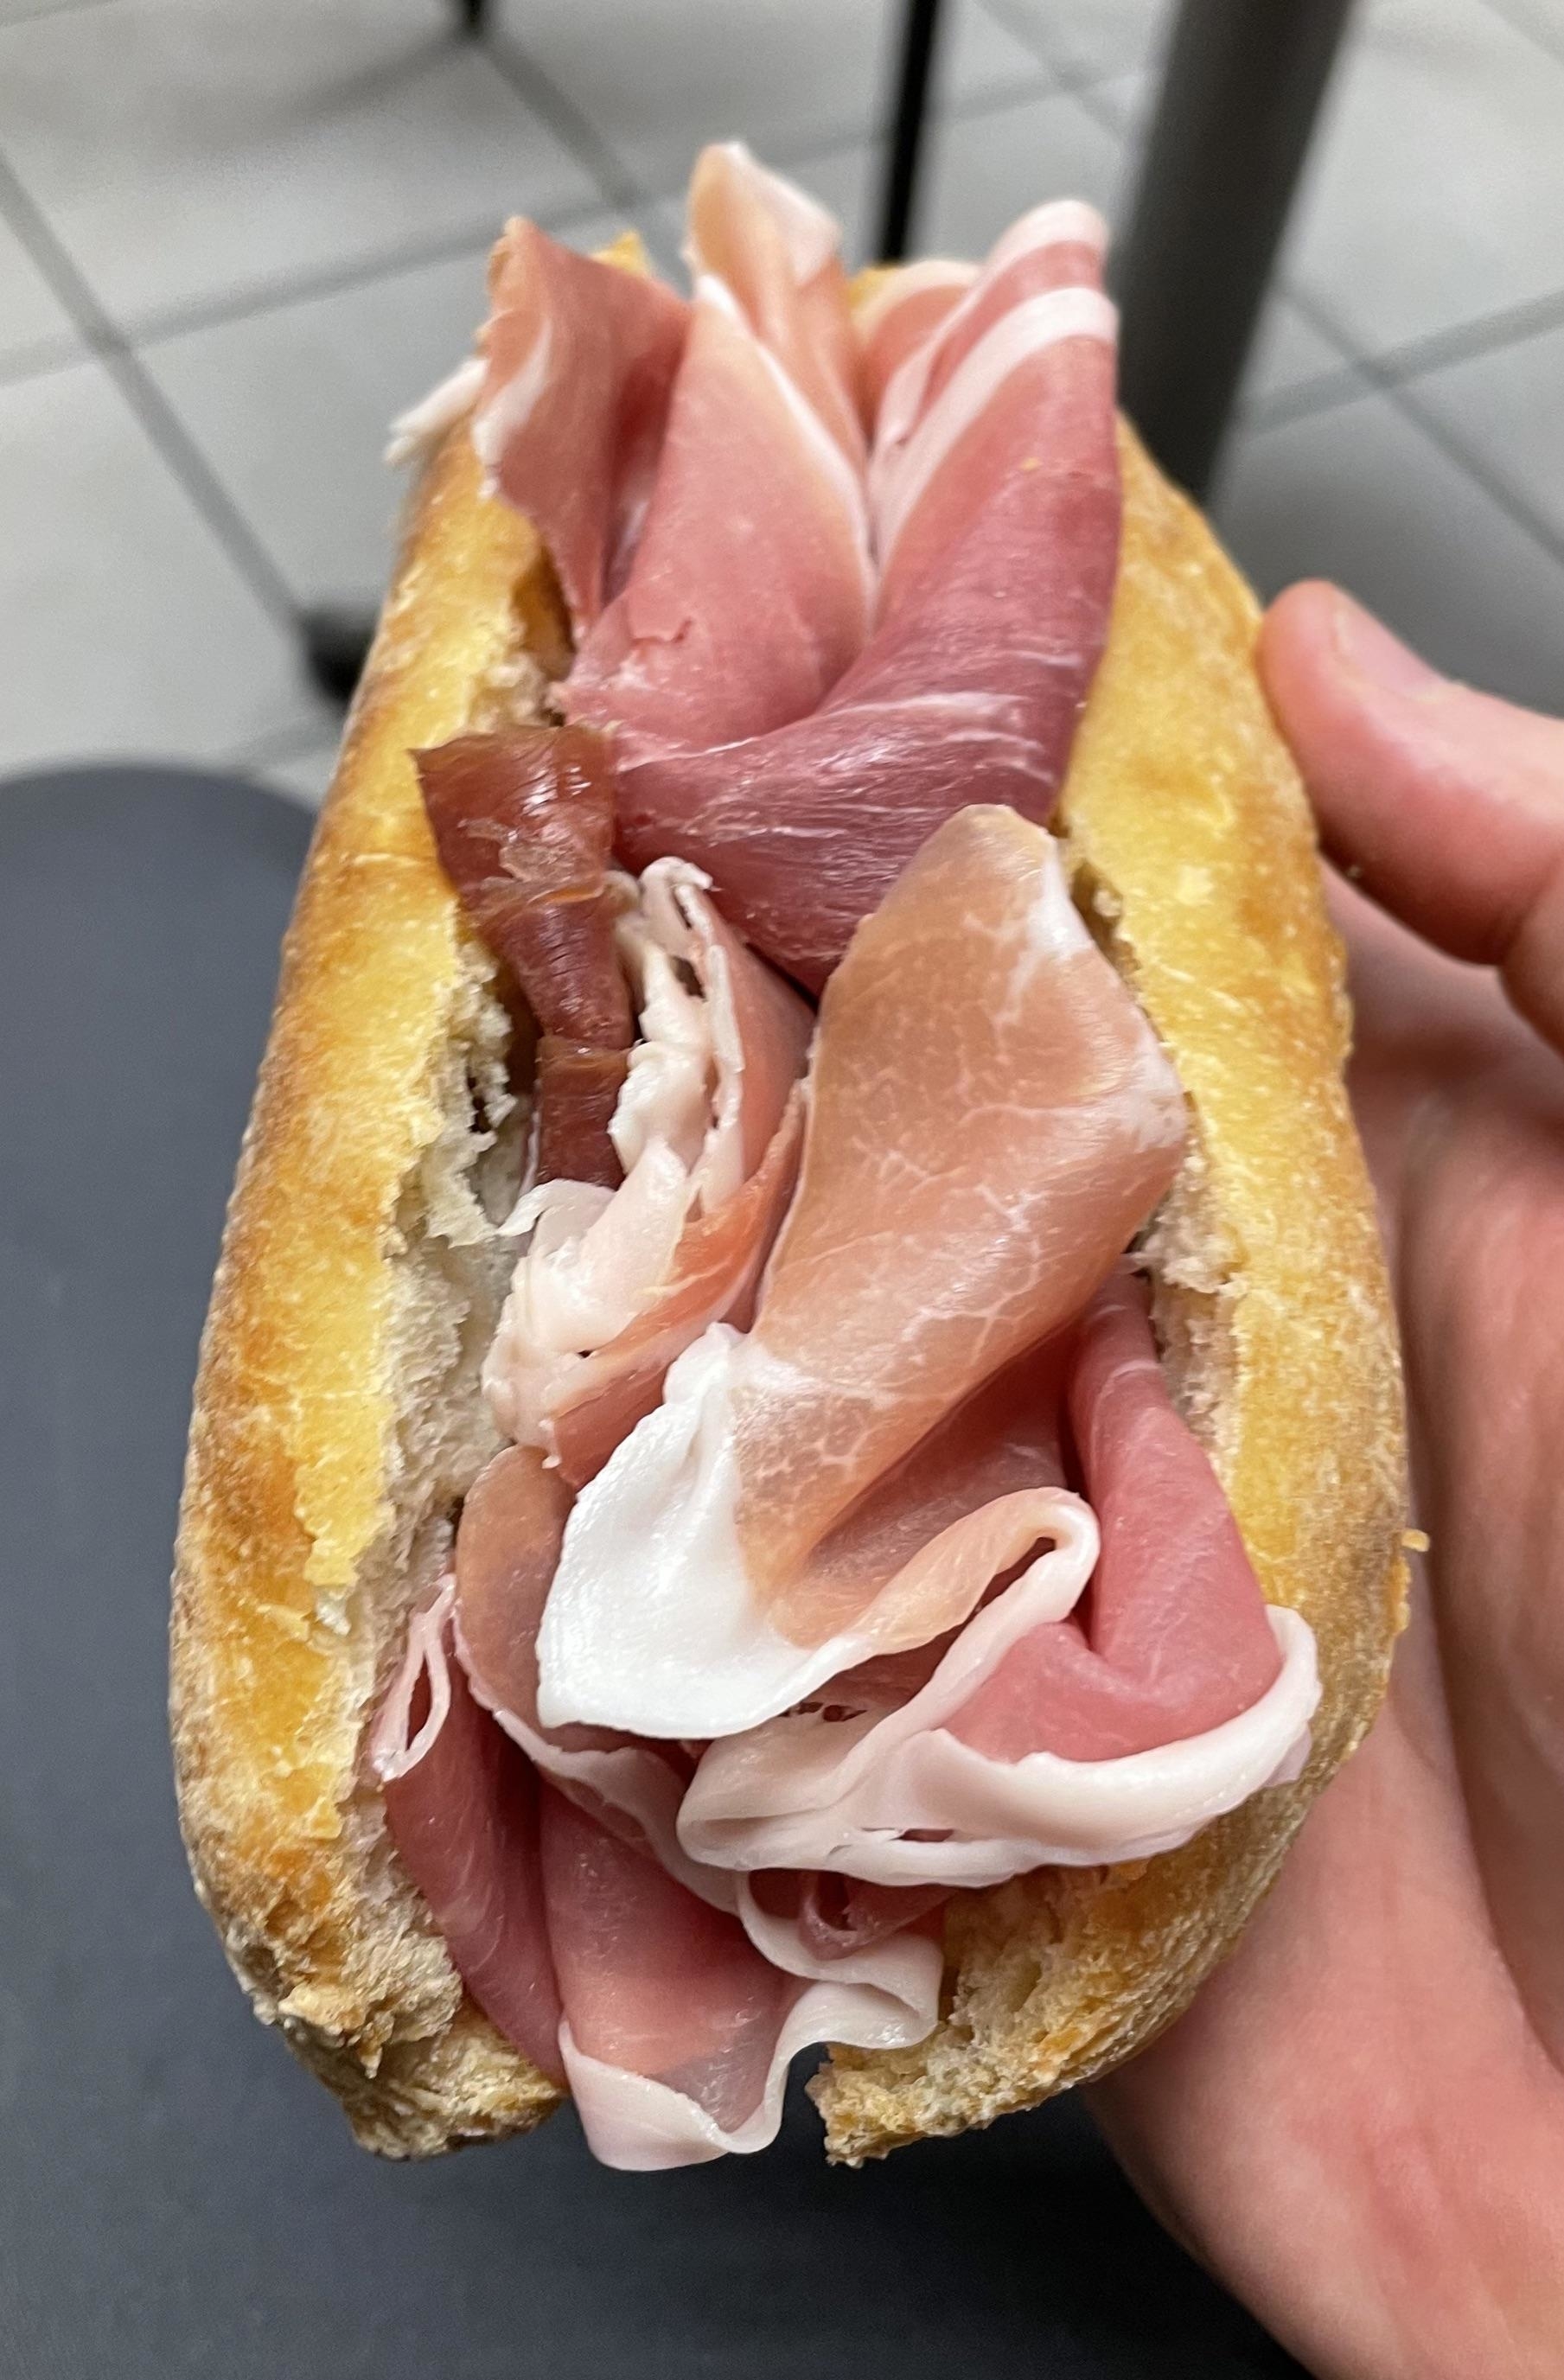 A hand holding a baguette sandwich filled with slices of cured ham